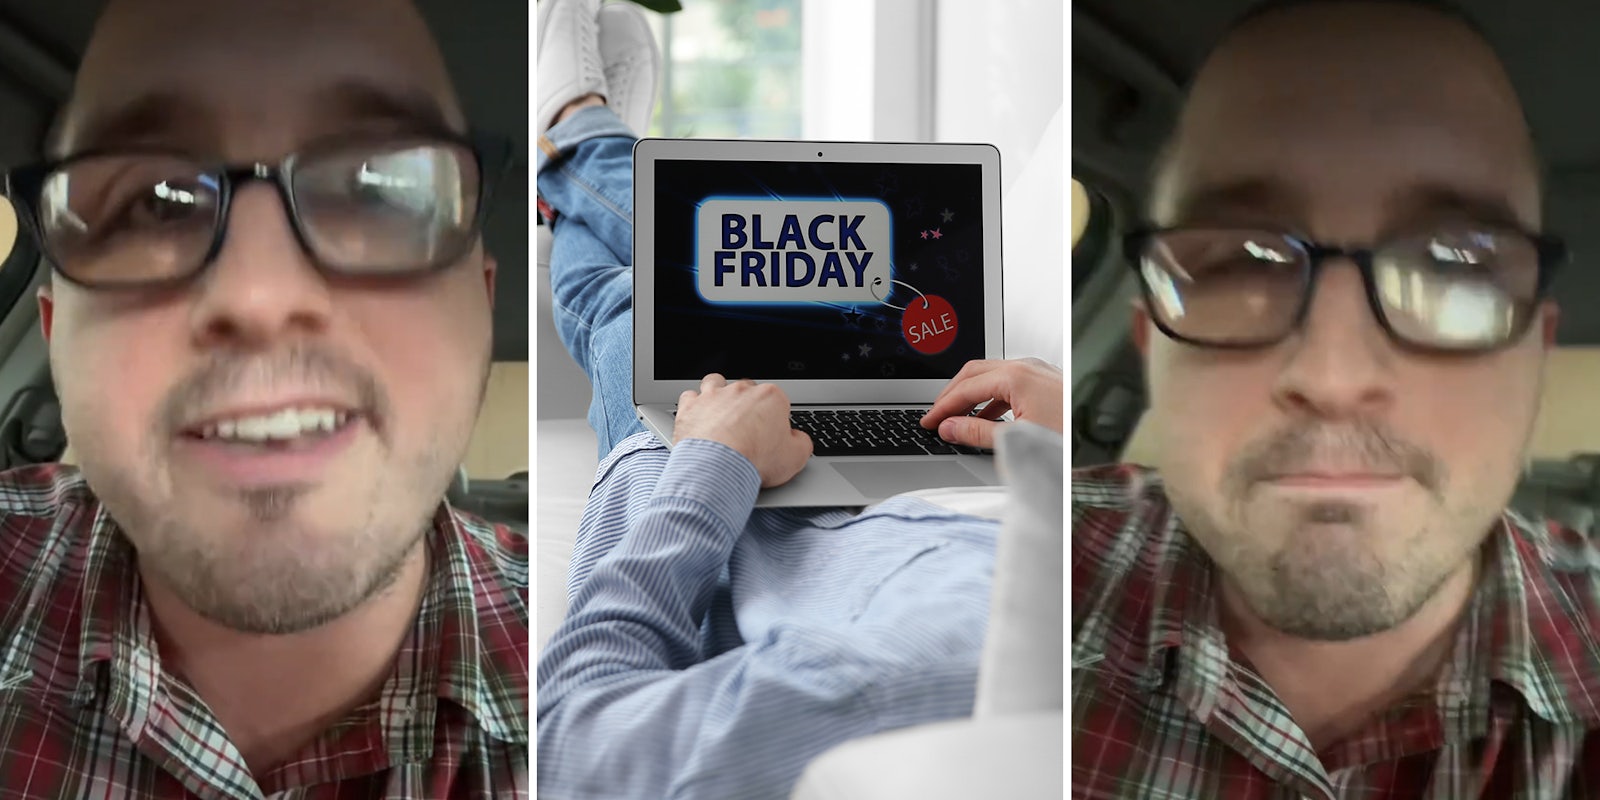 Finance expert slams Black Friday, says 'markdowns are not real'